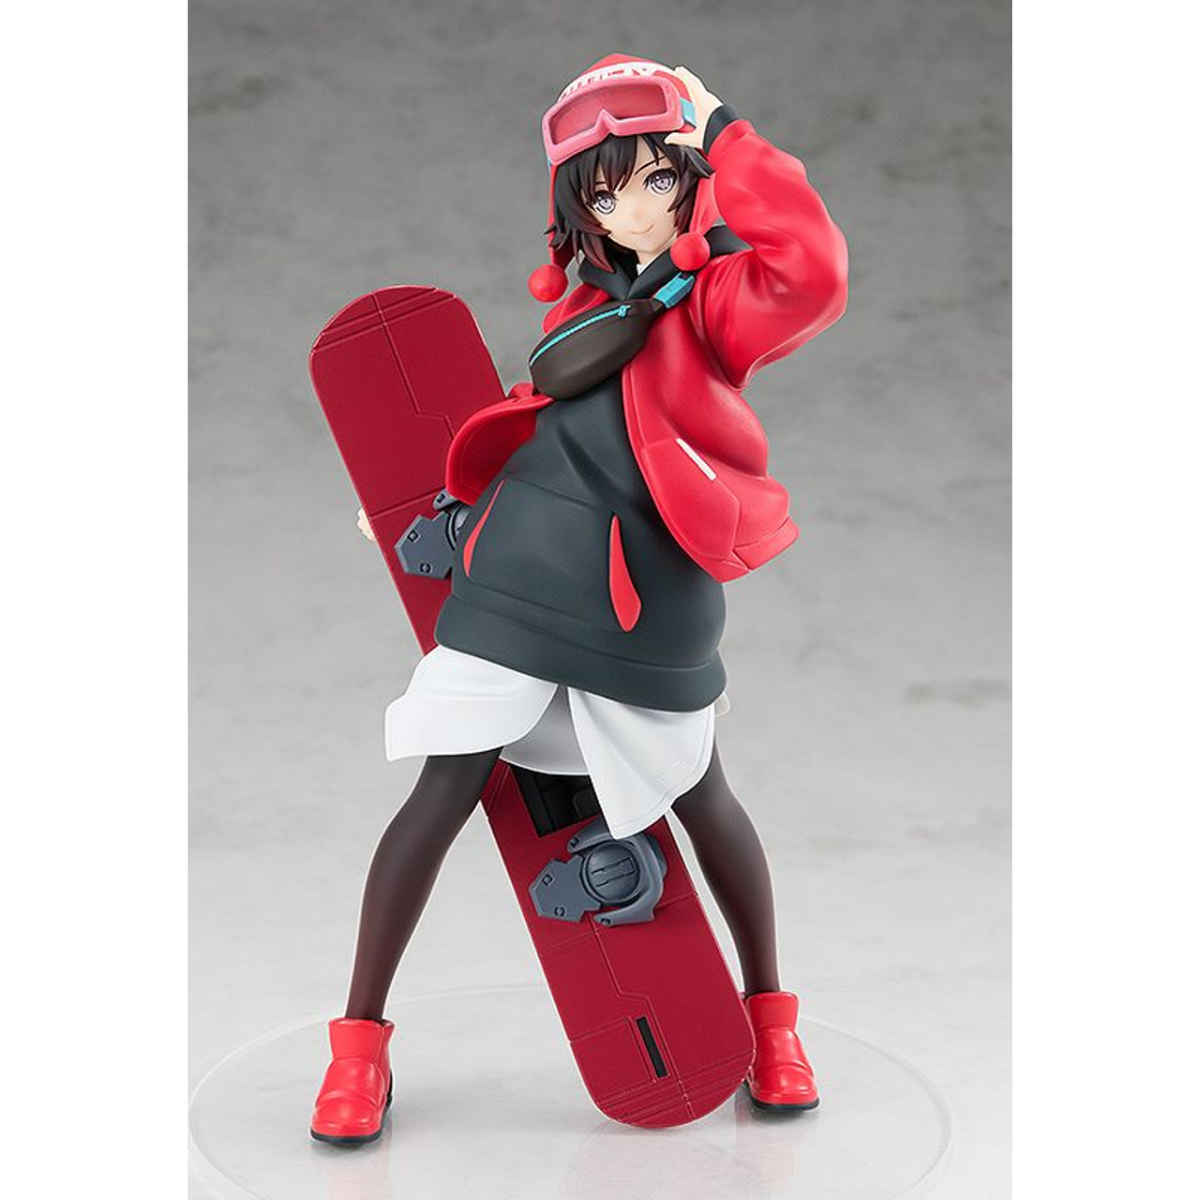 RWBY: Ice Queendom Pop Up Parade "Ruby Rose: Lucid Dream"-Good Smile Company-Ace Cards & Collectibles